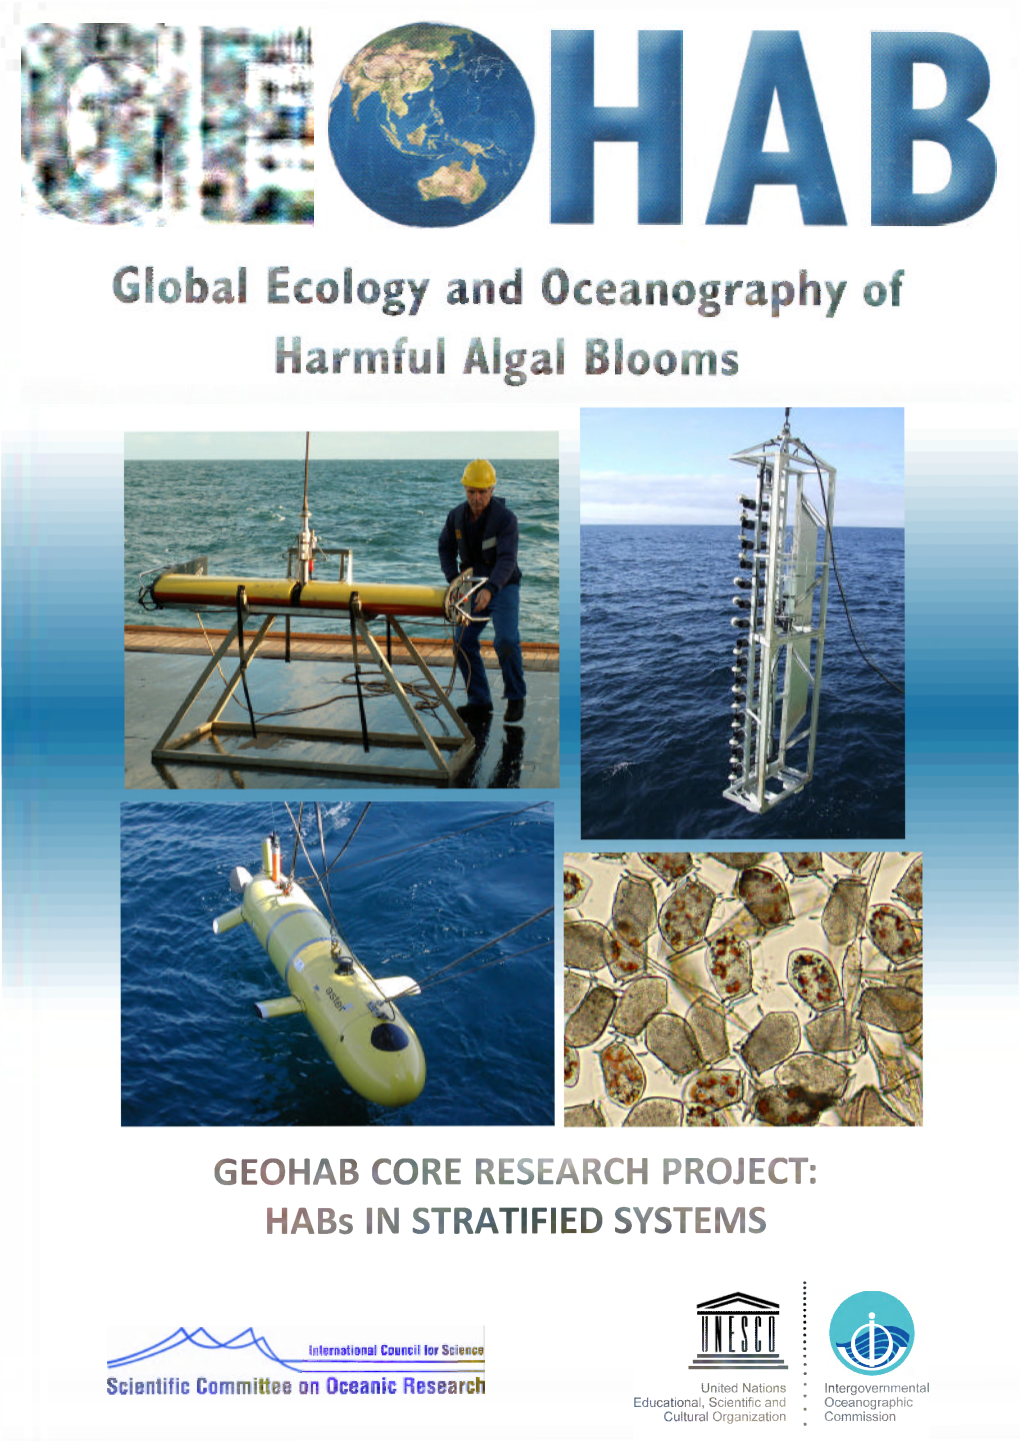 GEOHAB CORE RESEARCH PROJECT: Habs in STRATIFIED SYSTEMS